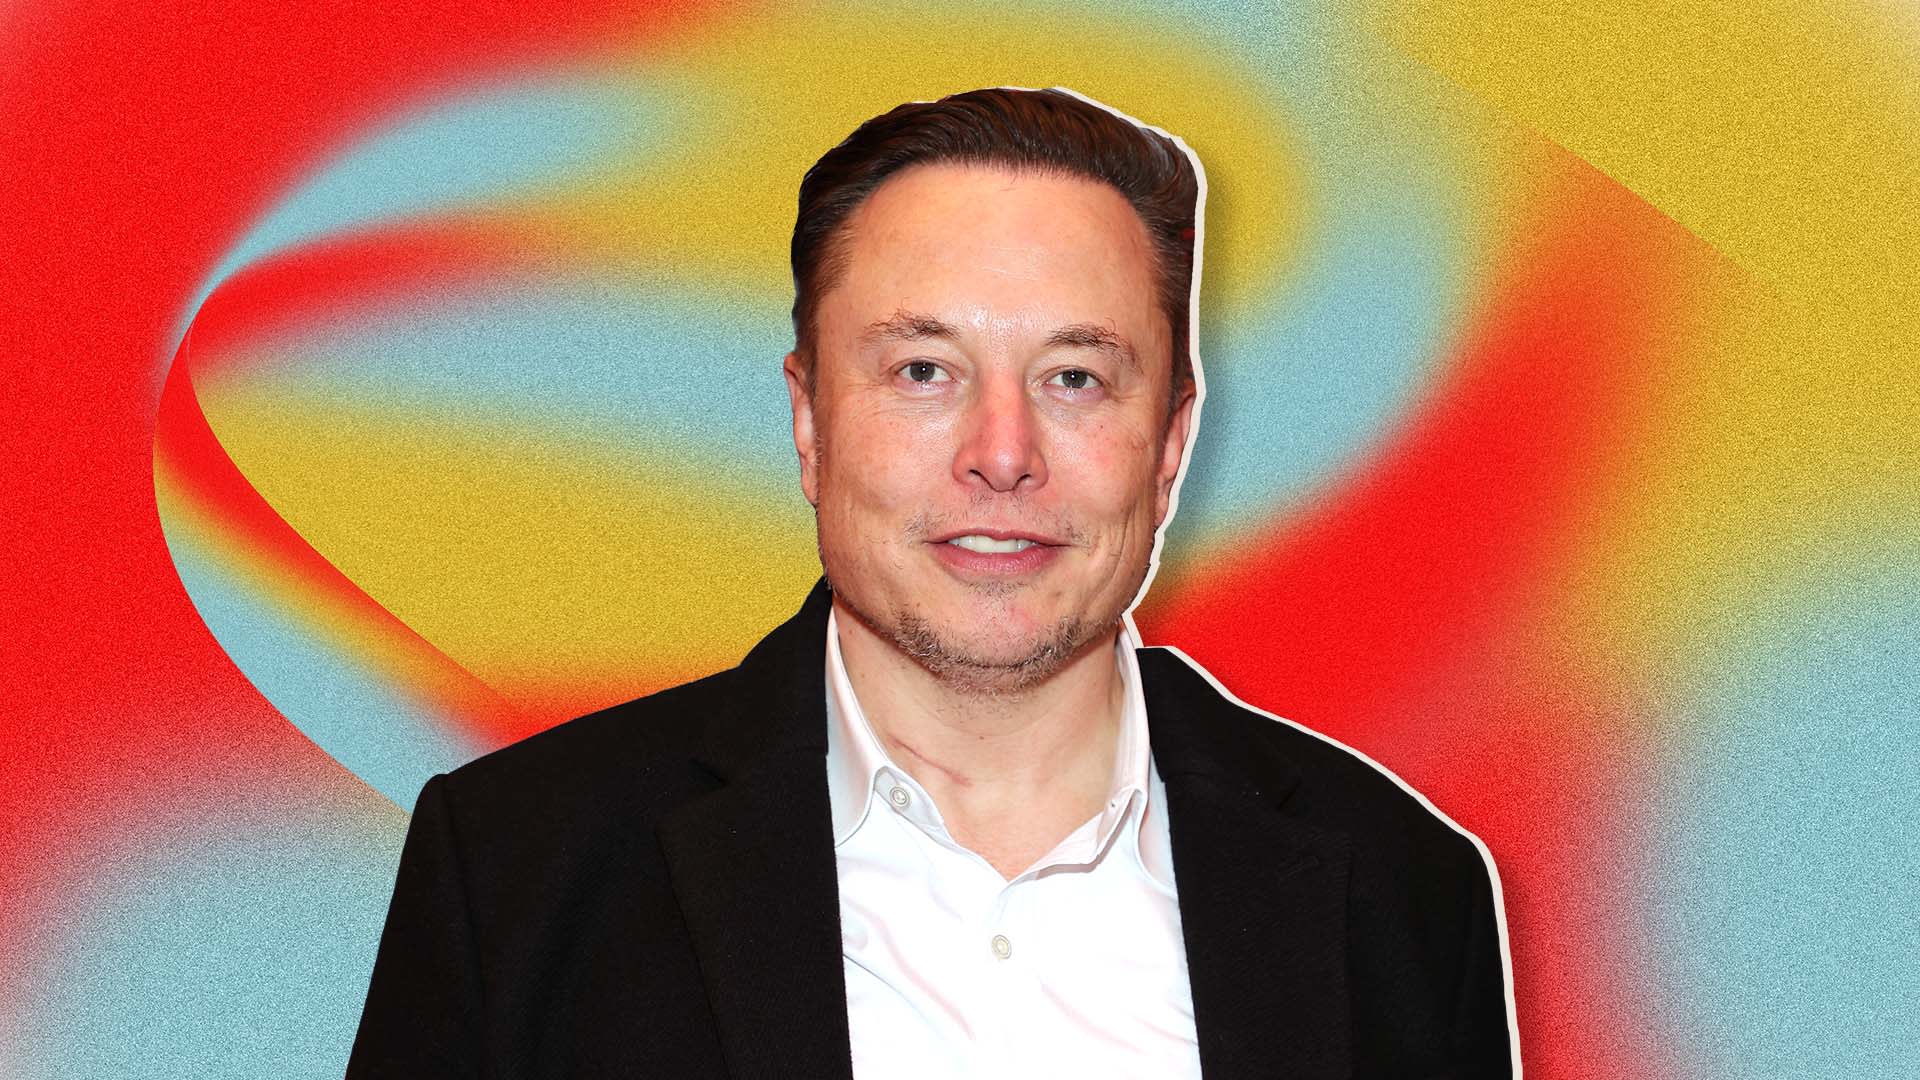 This Mindset Explains Why Elon Musk Is Time's Person of the Year